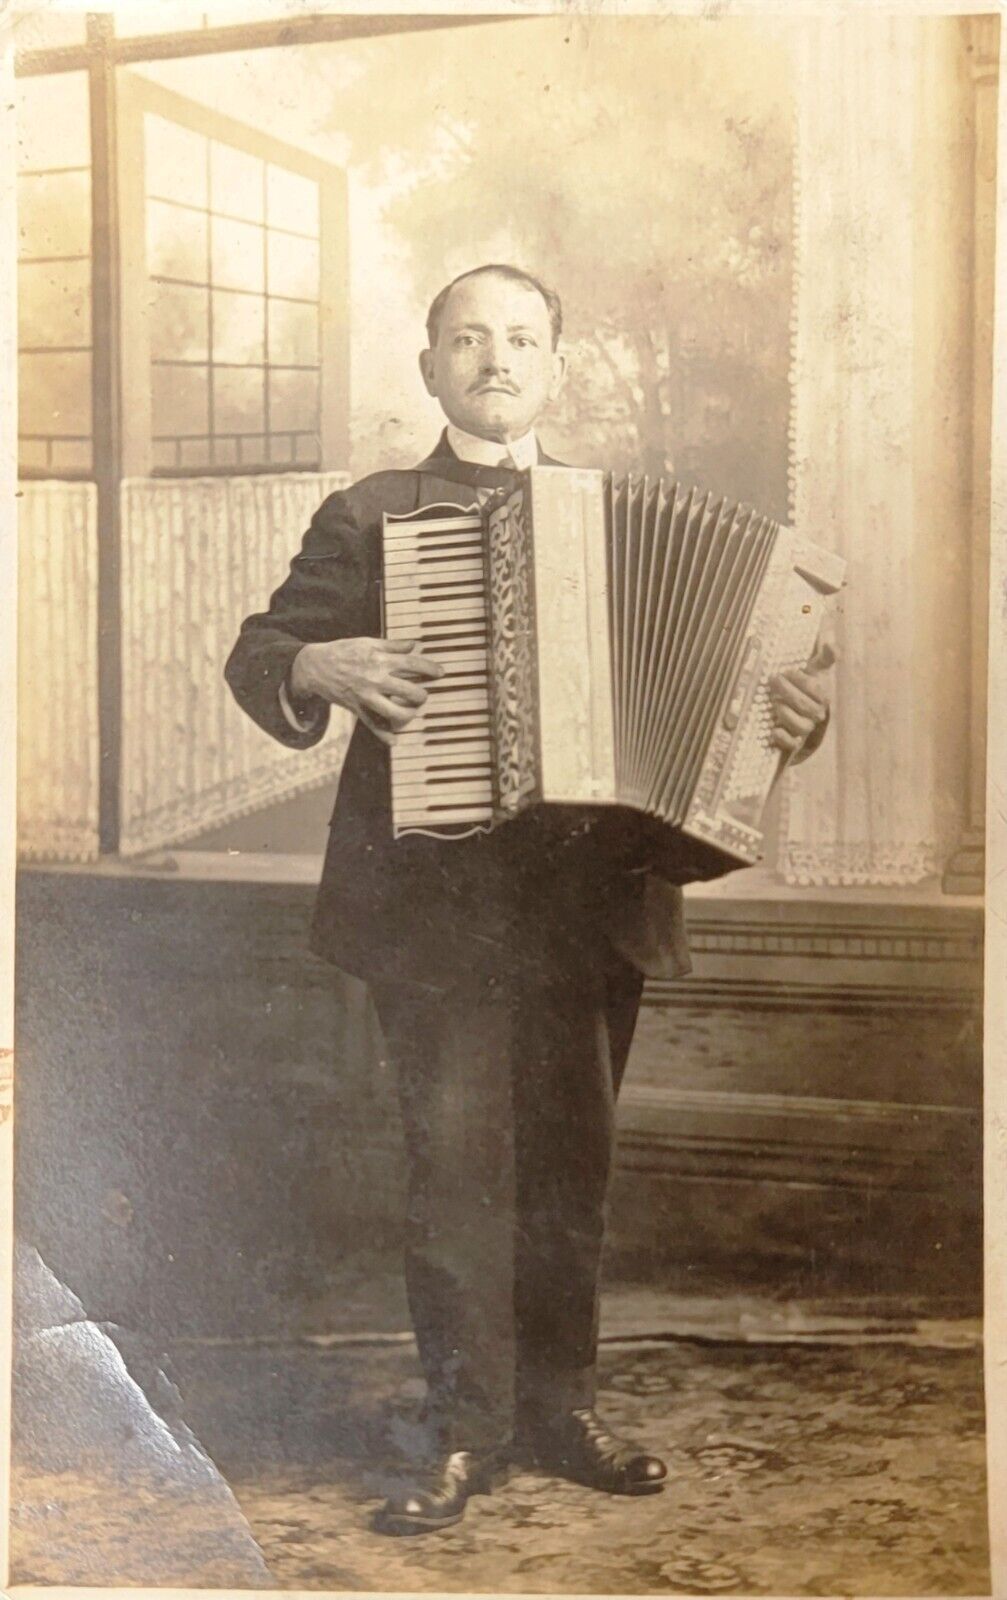 A Man Playing Accordion Real Photo Post Card RPPC AZO 1926-40 UnPosted